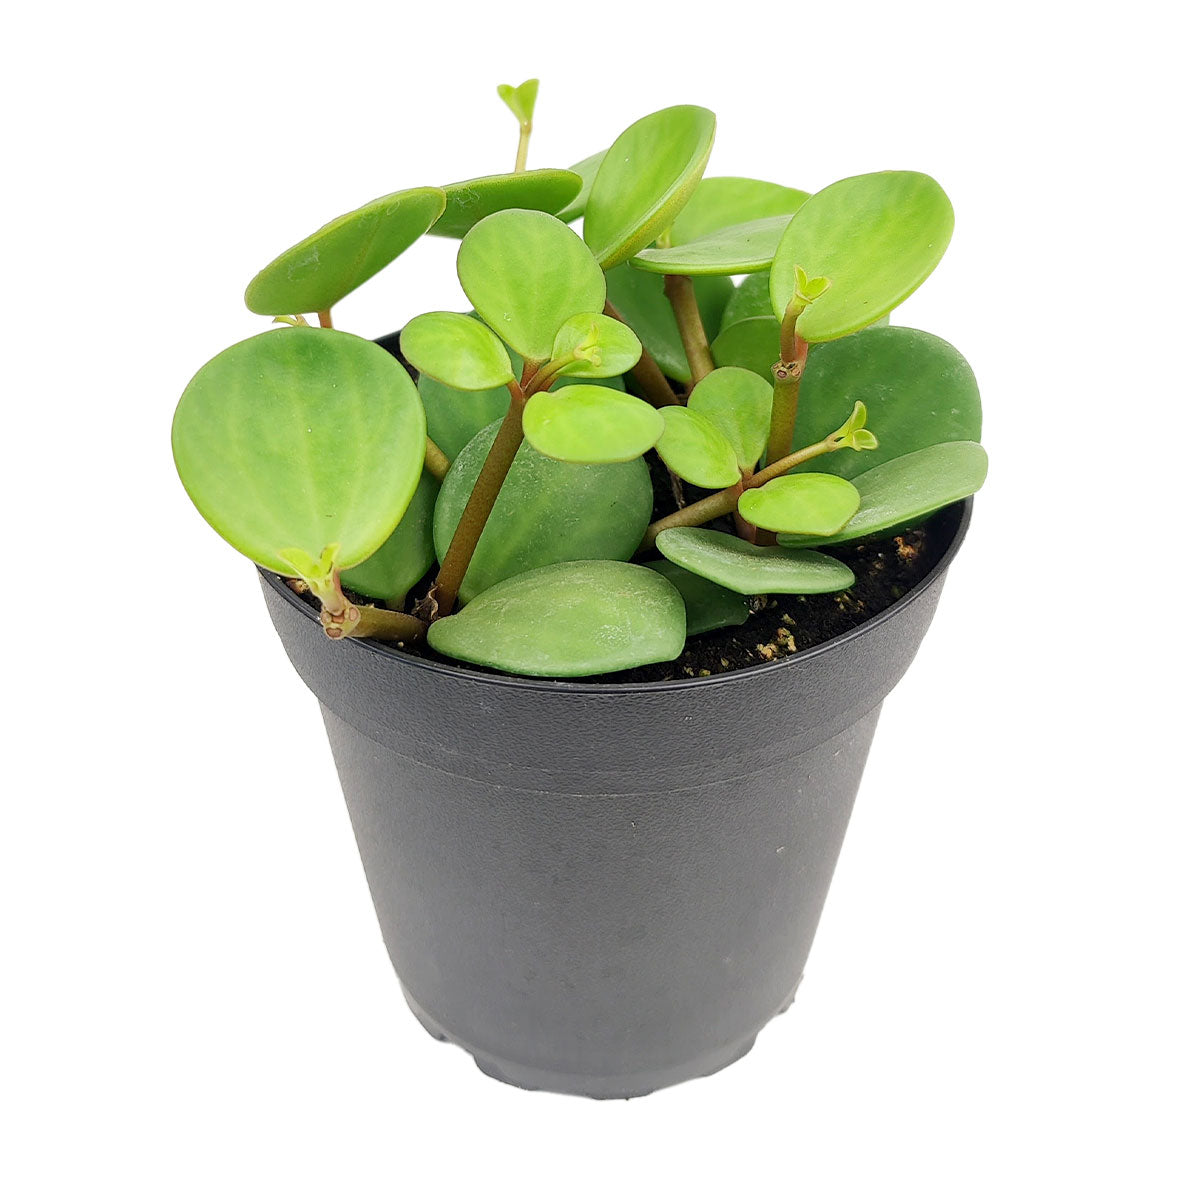  Peperomia Hope care guide, medium-light houseplant, houseplant for hanging baskets, light and watering requirement for Peperomia Hope